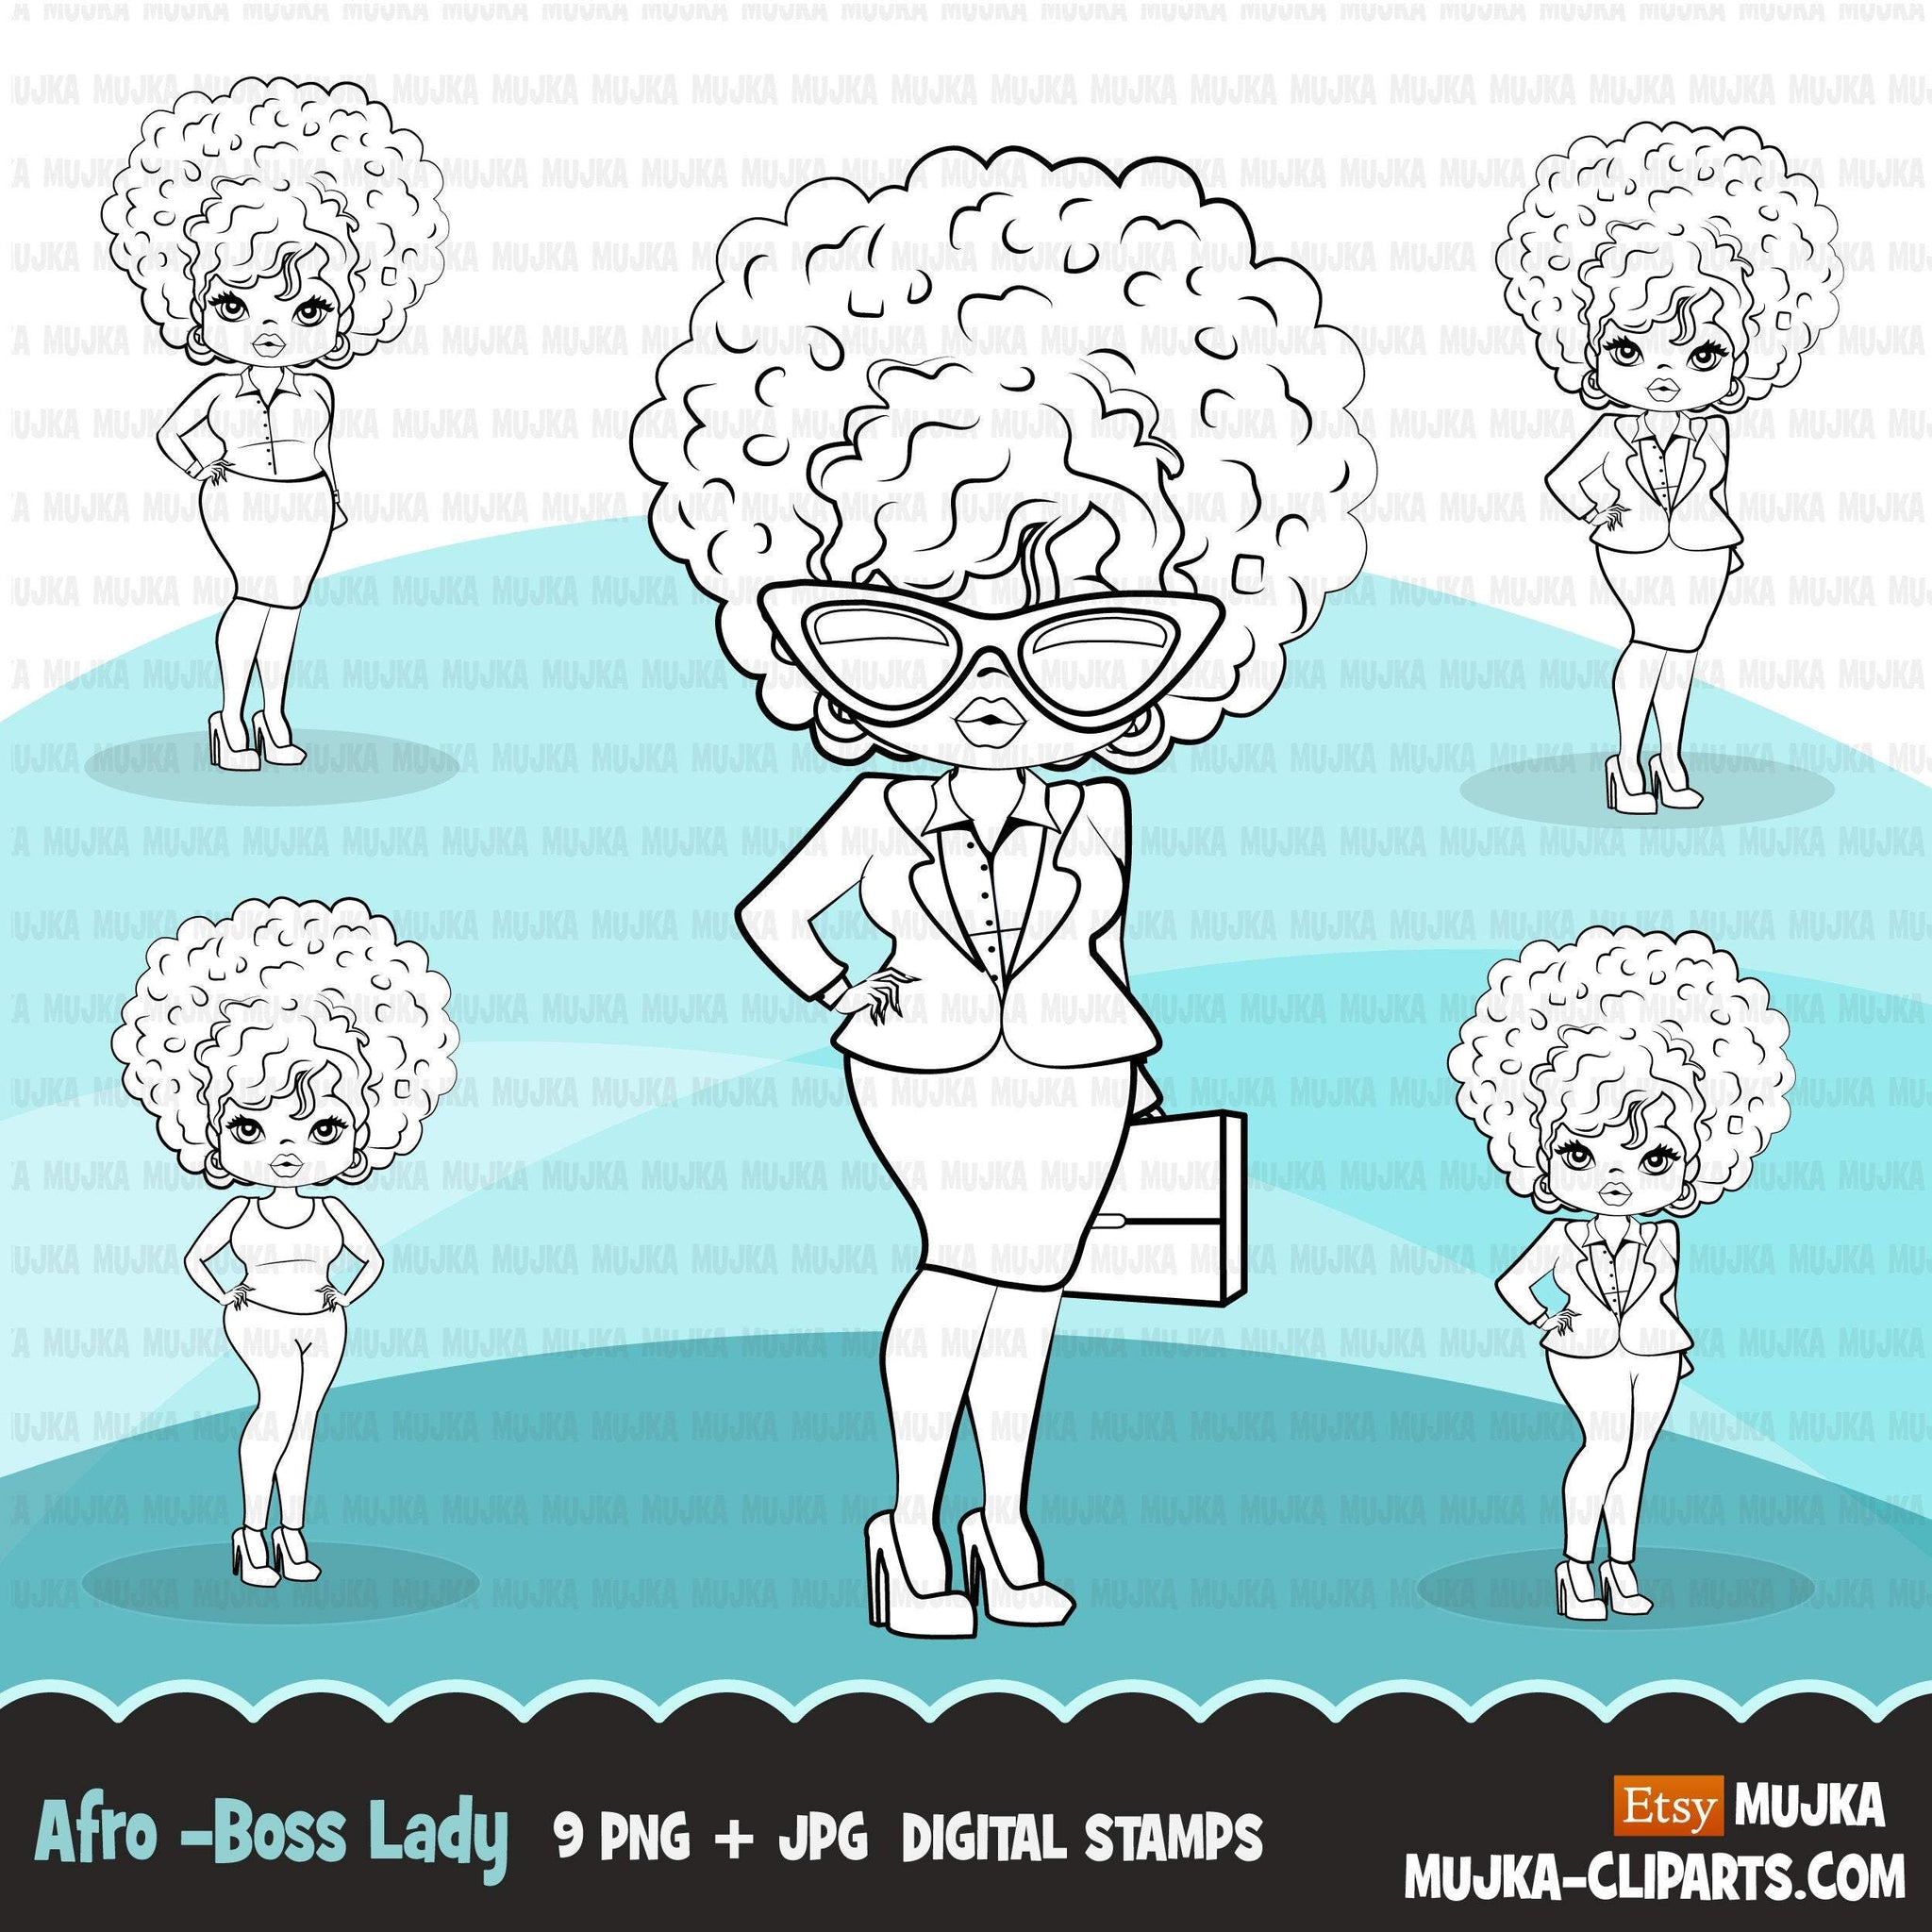 Afro woman digital stamps with business suit, briefcase and glasses black boss babe graphics, outline art